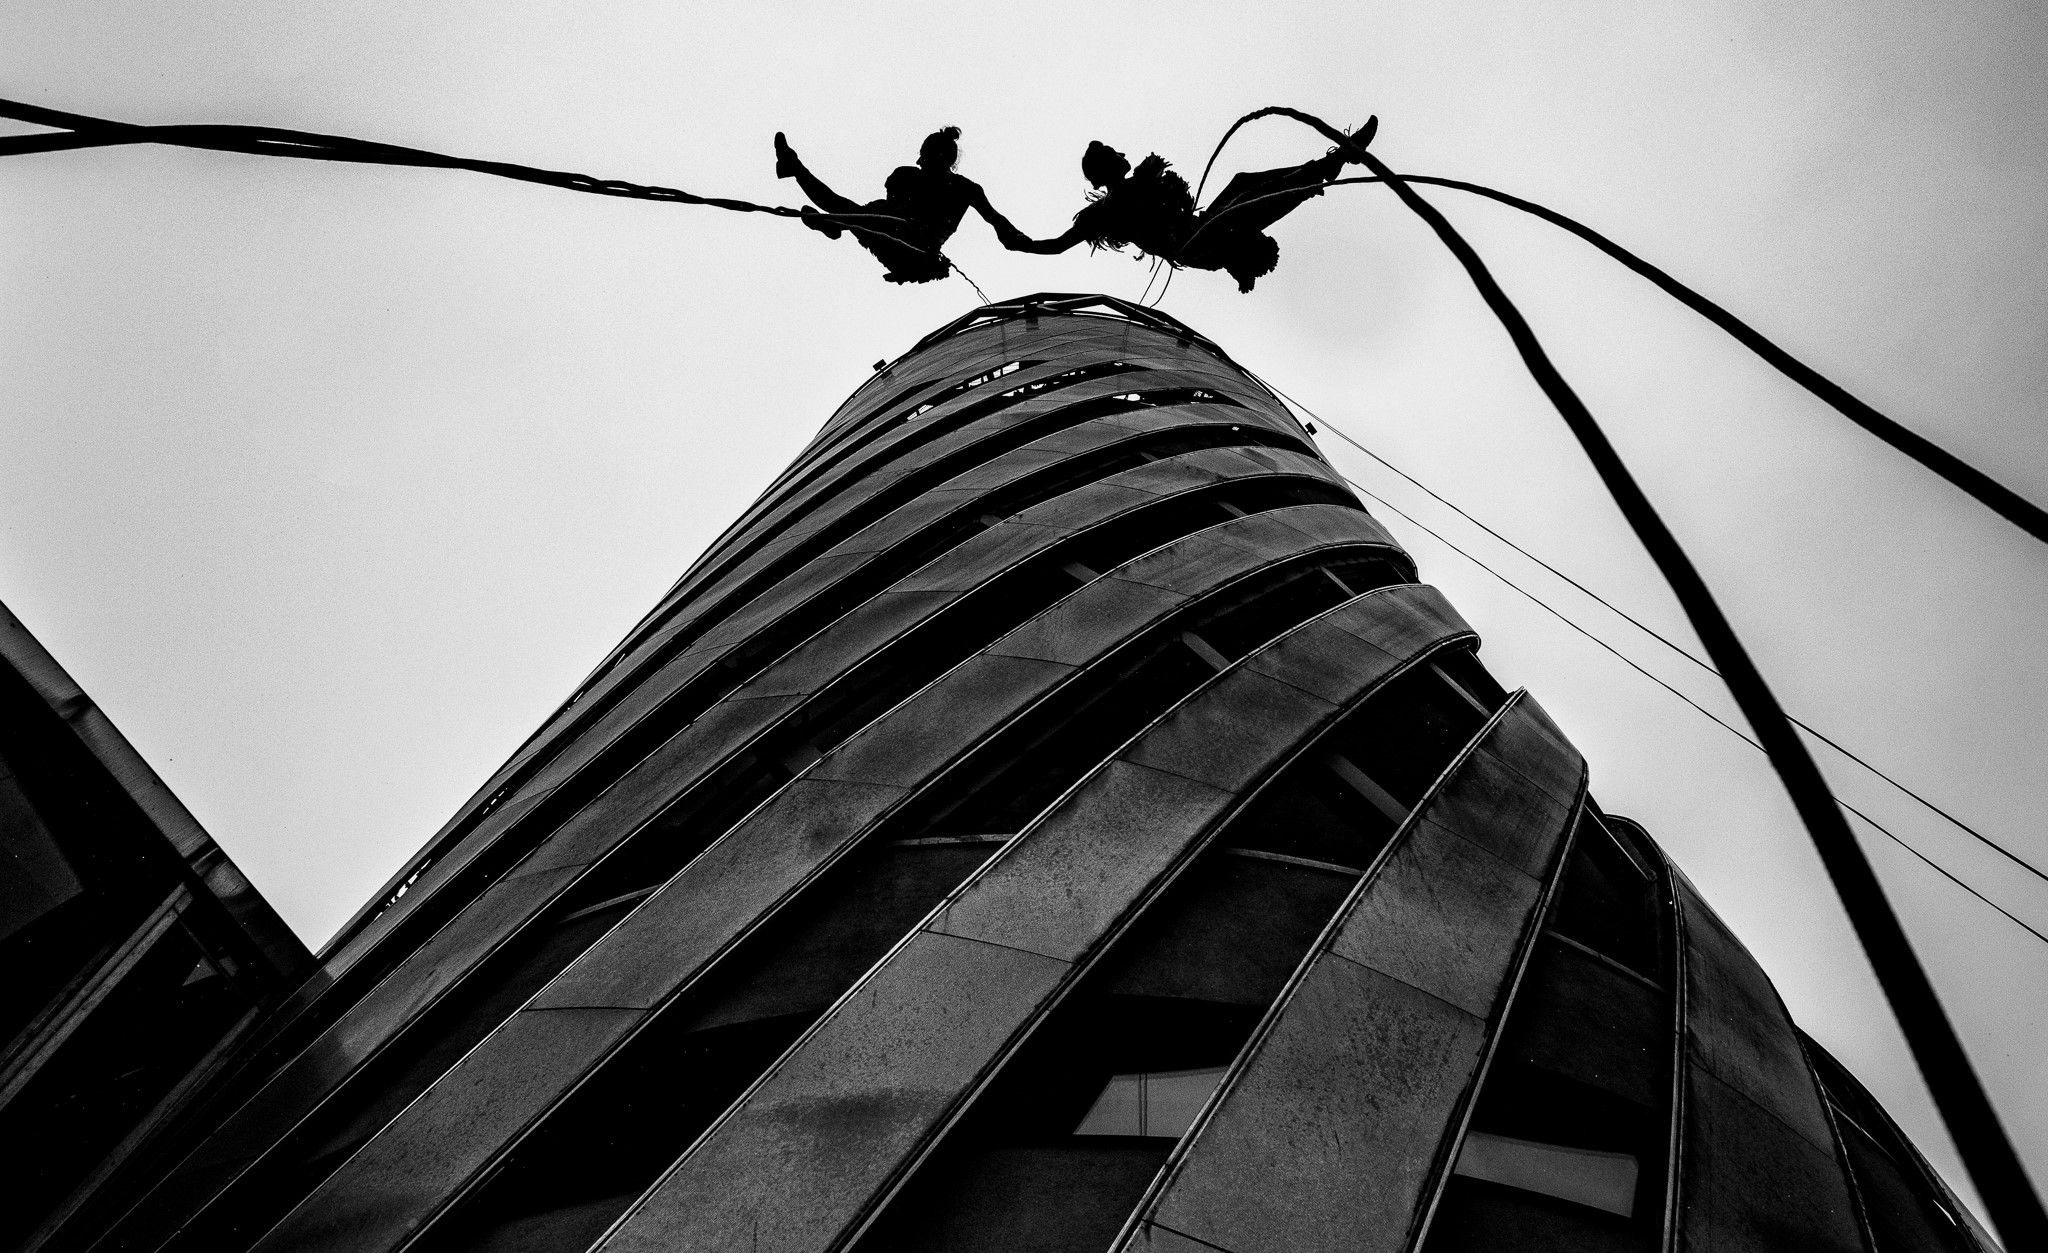 Black and white photograph of two performers suspended in front of large spiral building